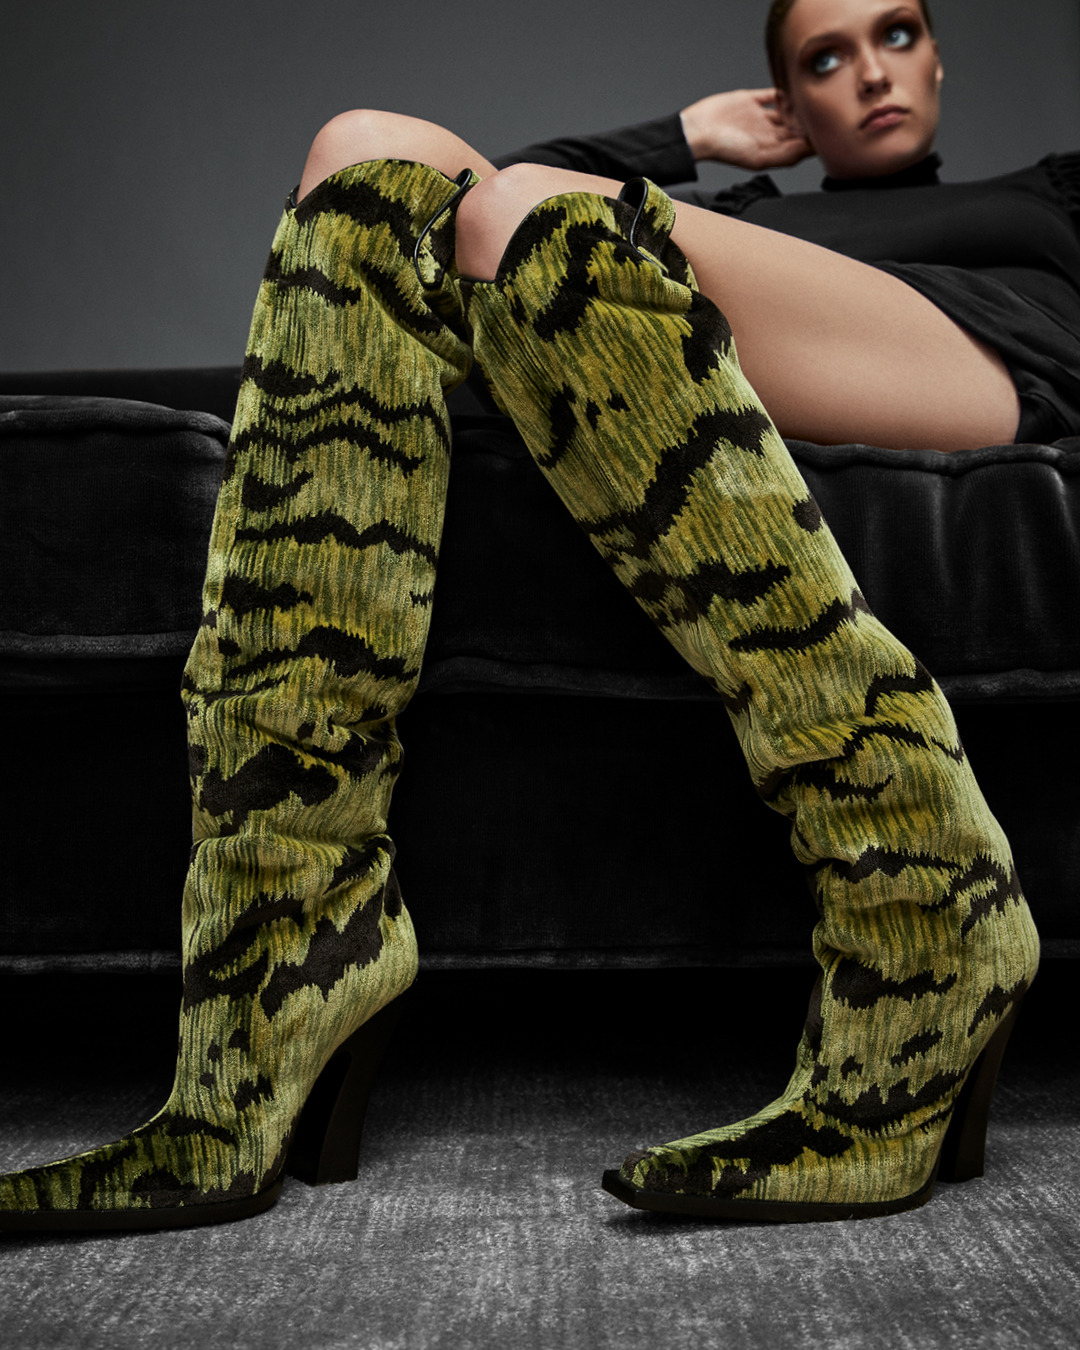 TOM FORD - Boots made for walking - featuring the Tiger...